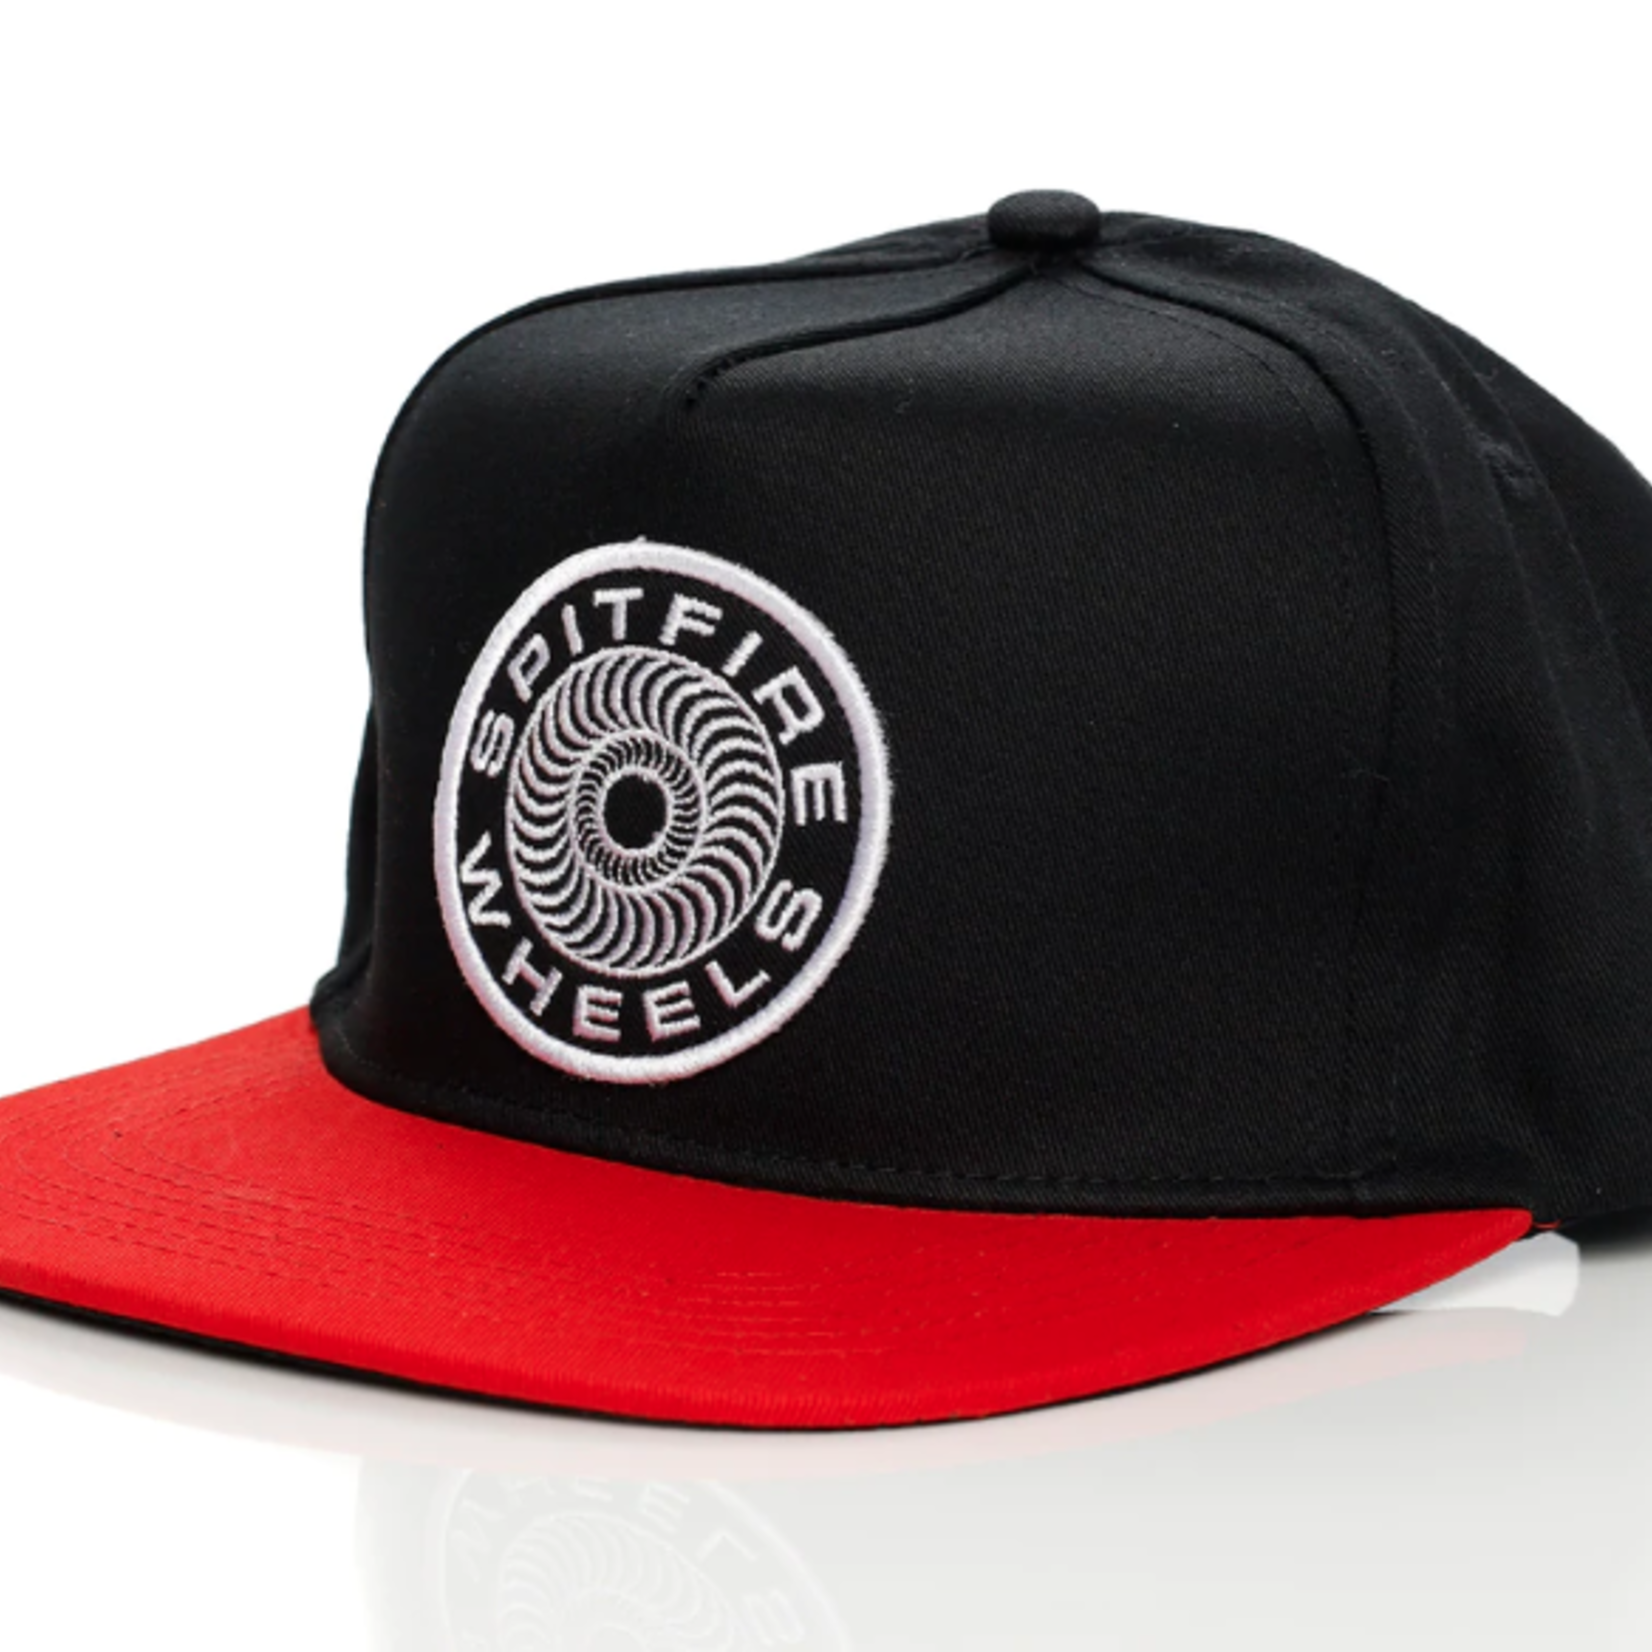 Spitfire Spitfire Classic 87 Swirl Patch Hat - Black/Red